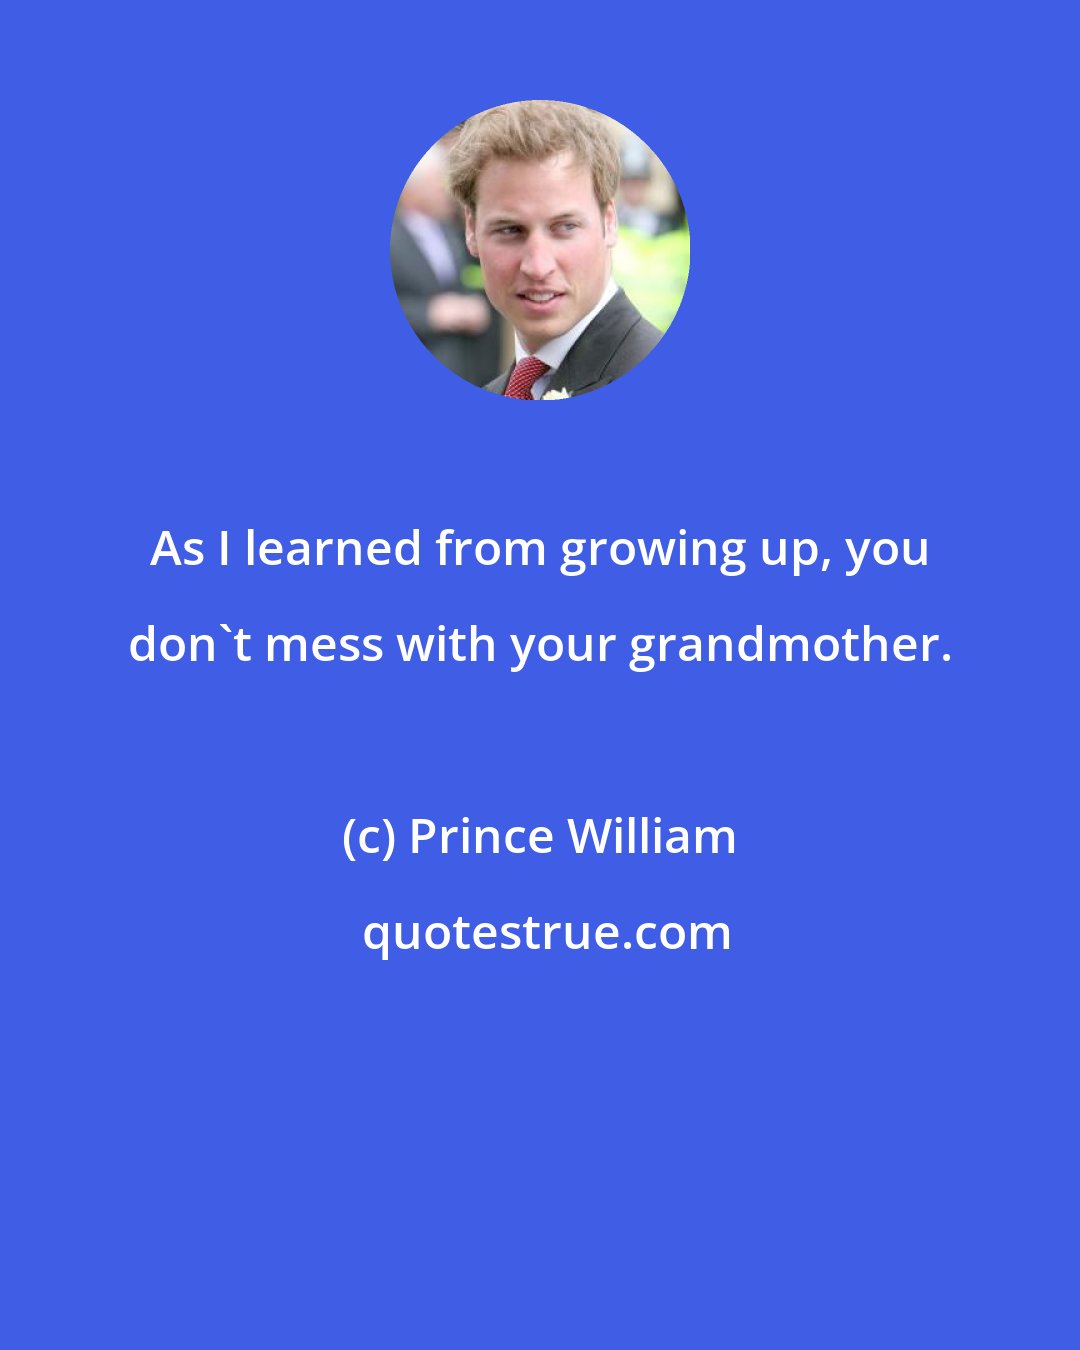 Prince William: As I learned from growing up, you don't mess with your grandmother.